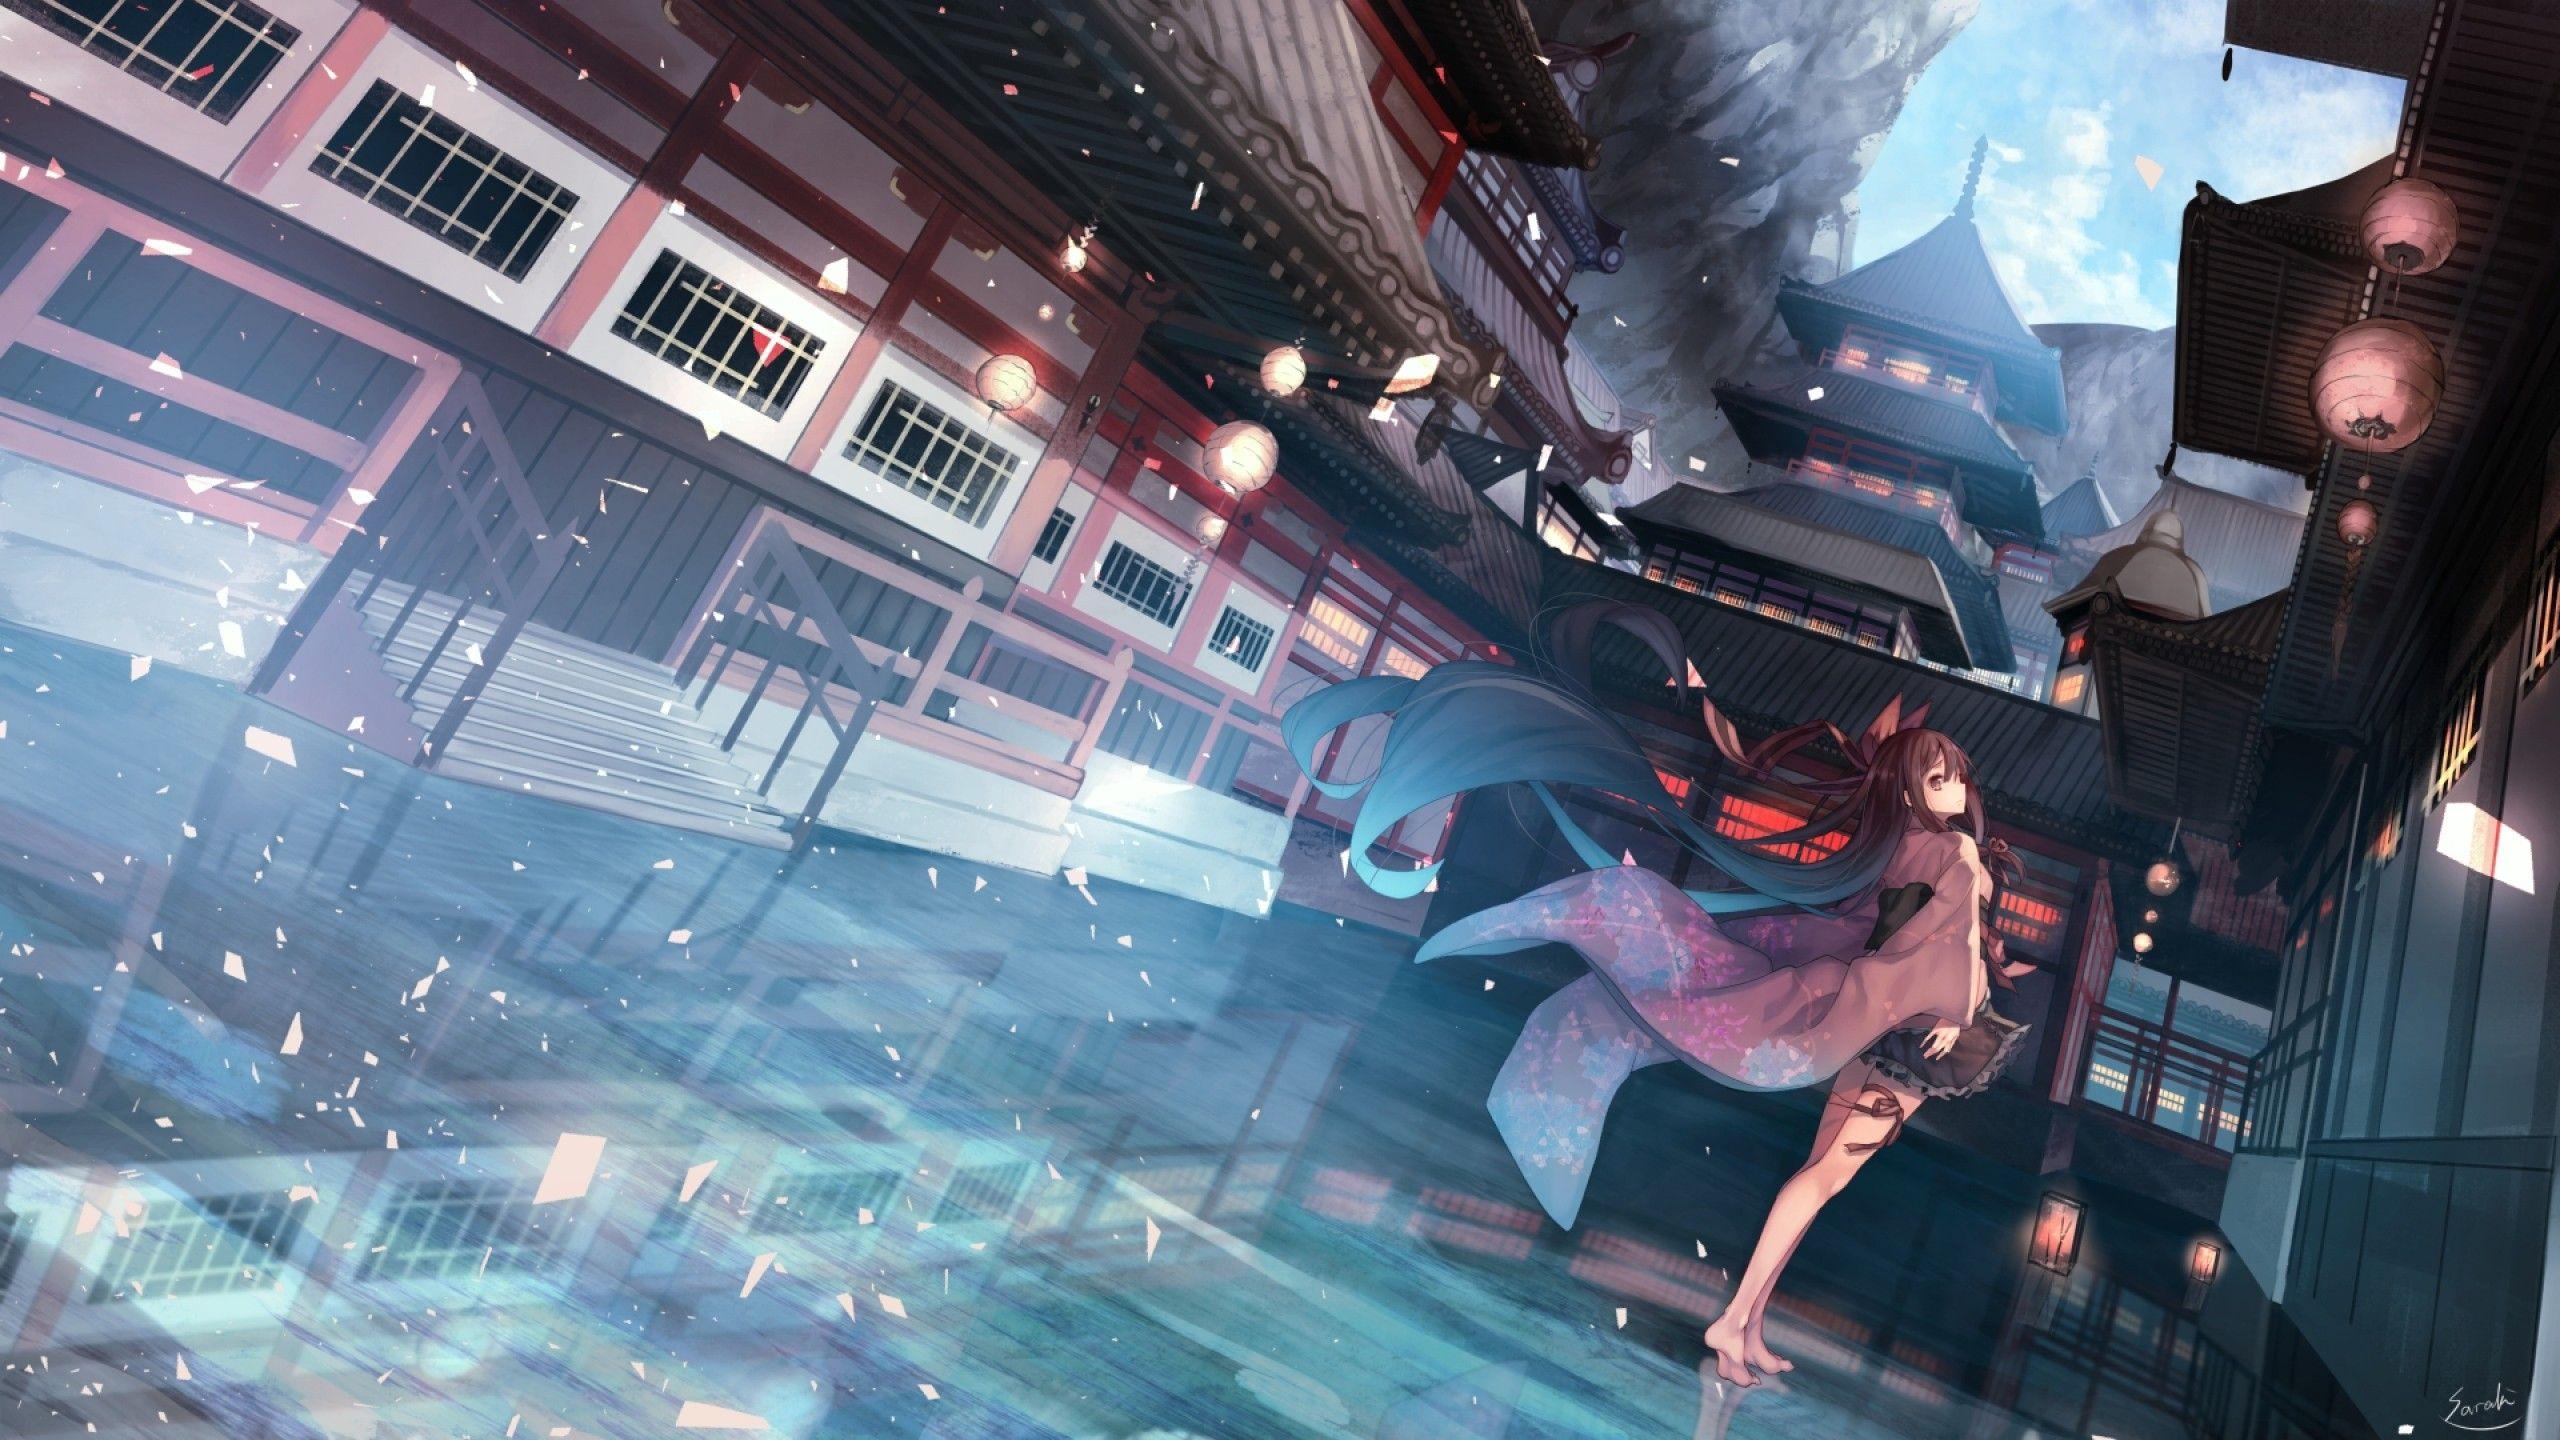 Download 2560x1440 Anime Girl, Japanese Buildings, Traditional